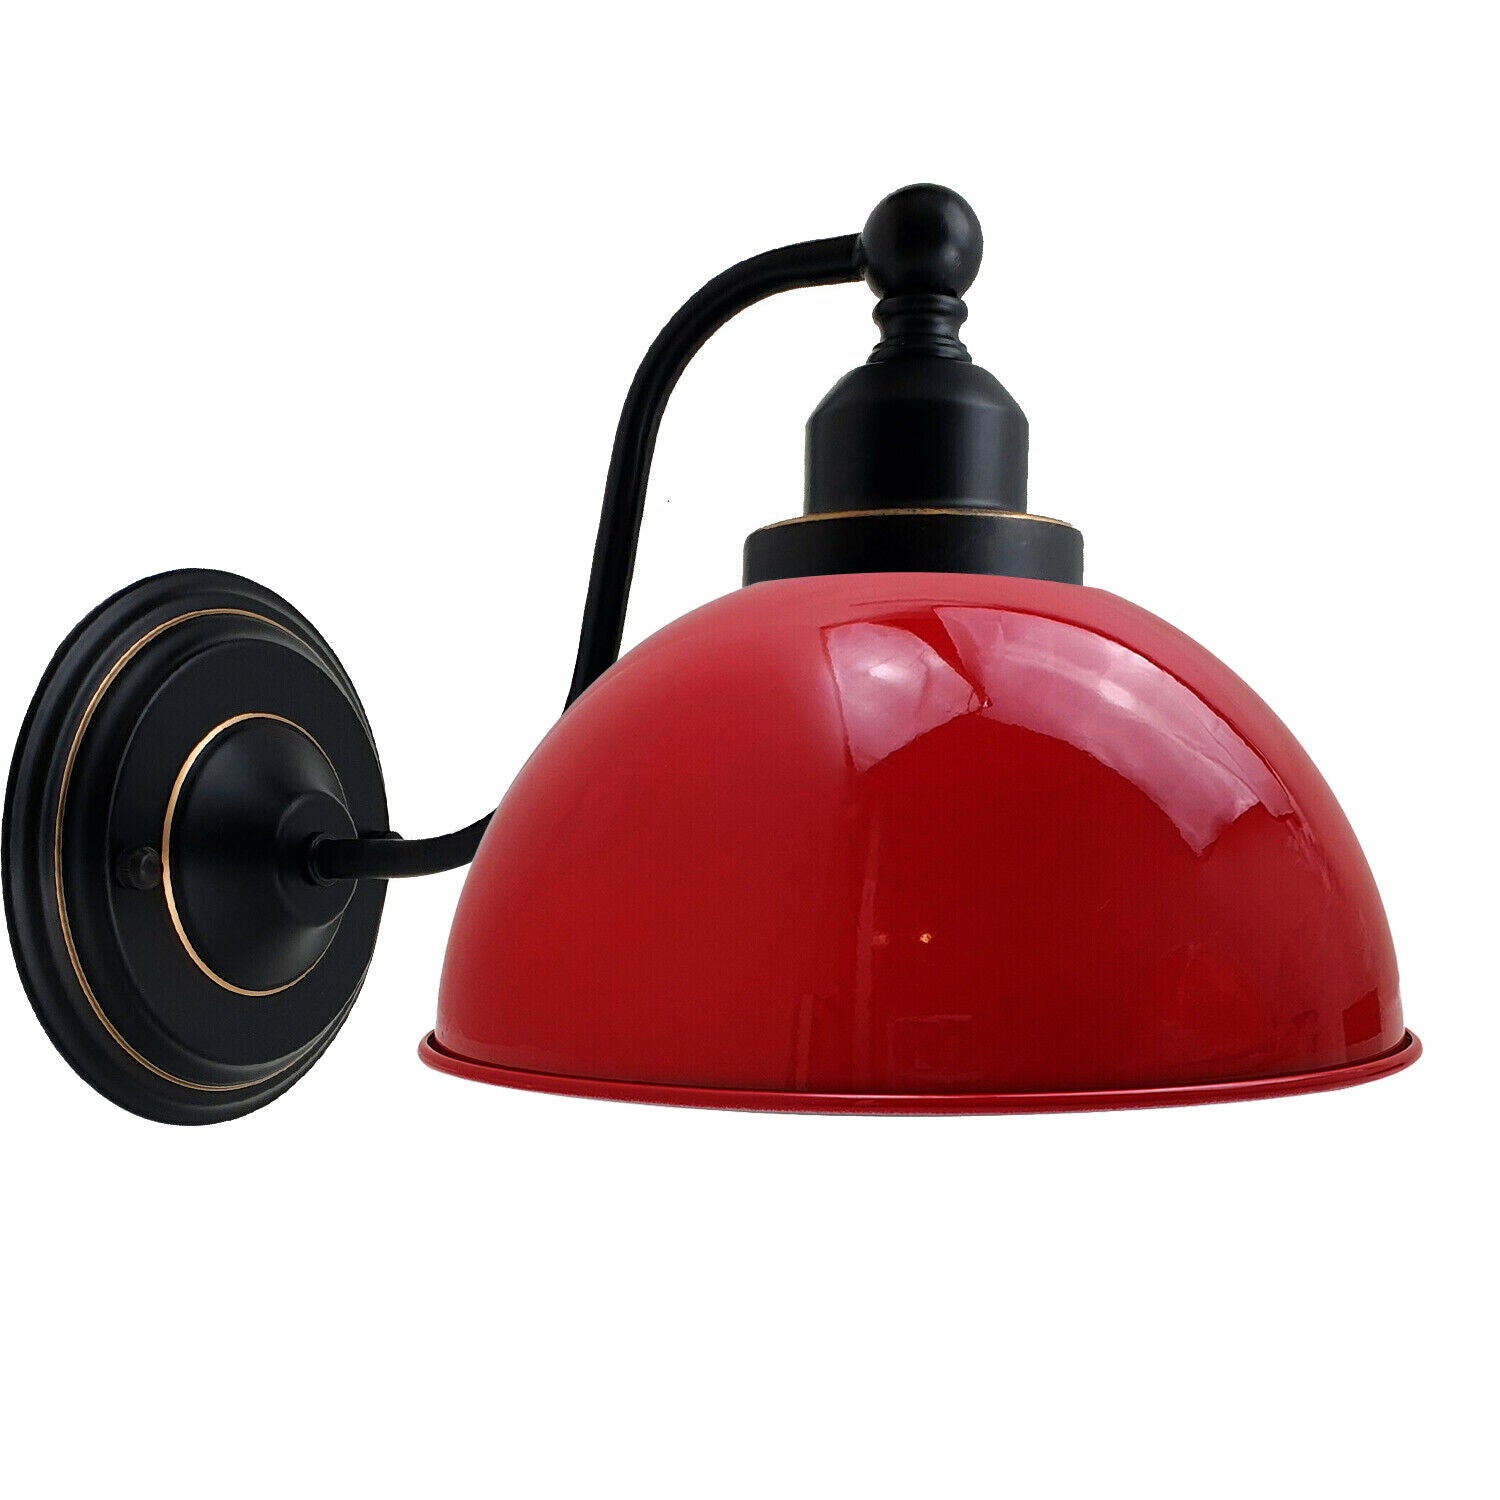 industrial vintage retro red wall sconces e27 uk holders